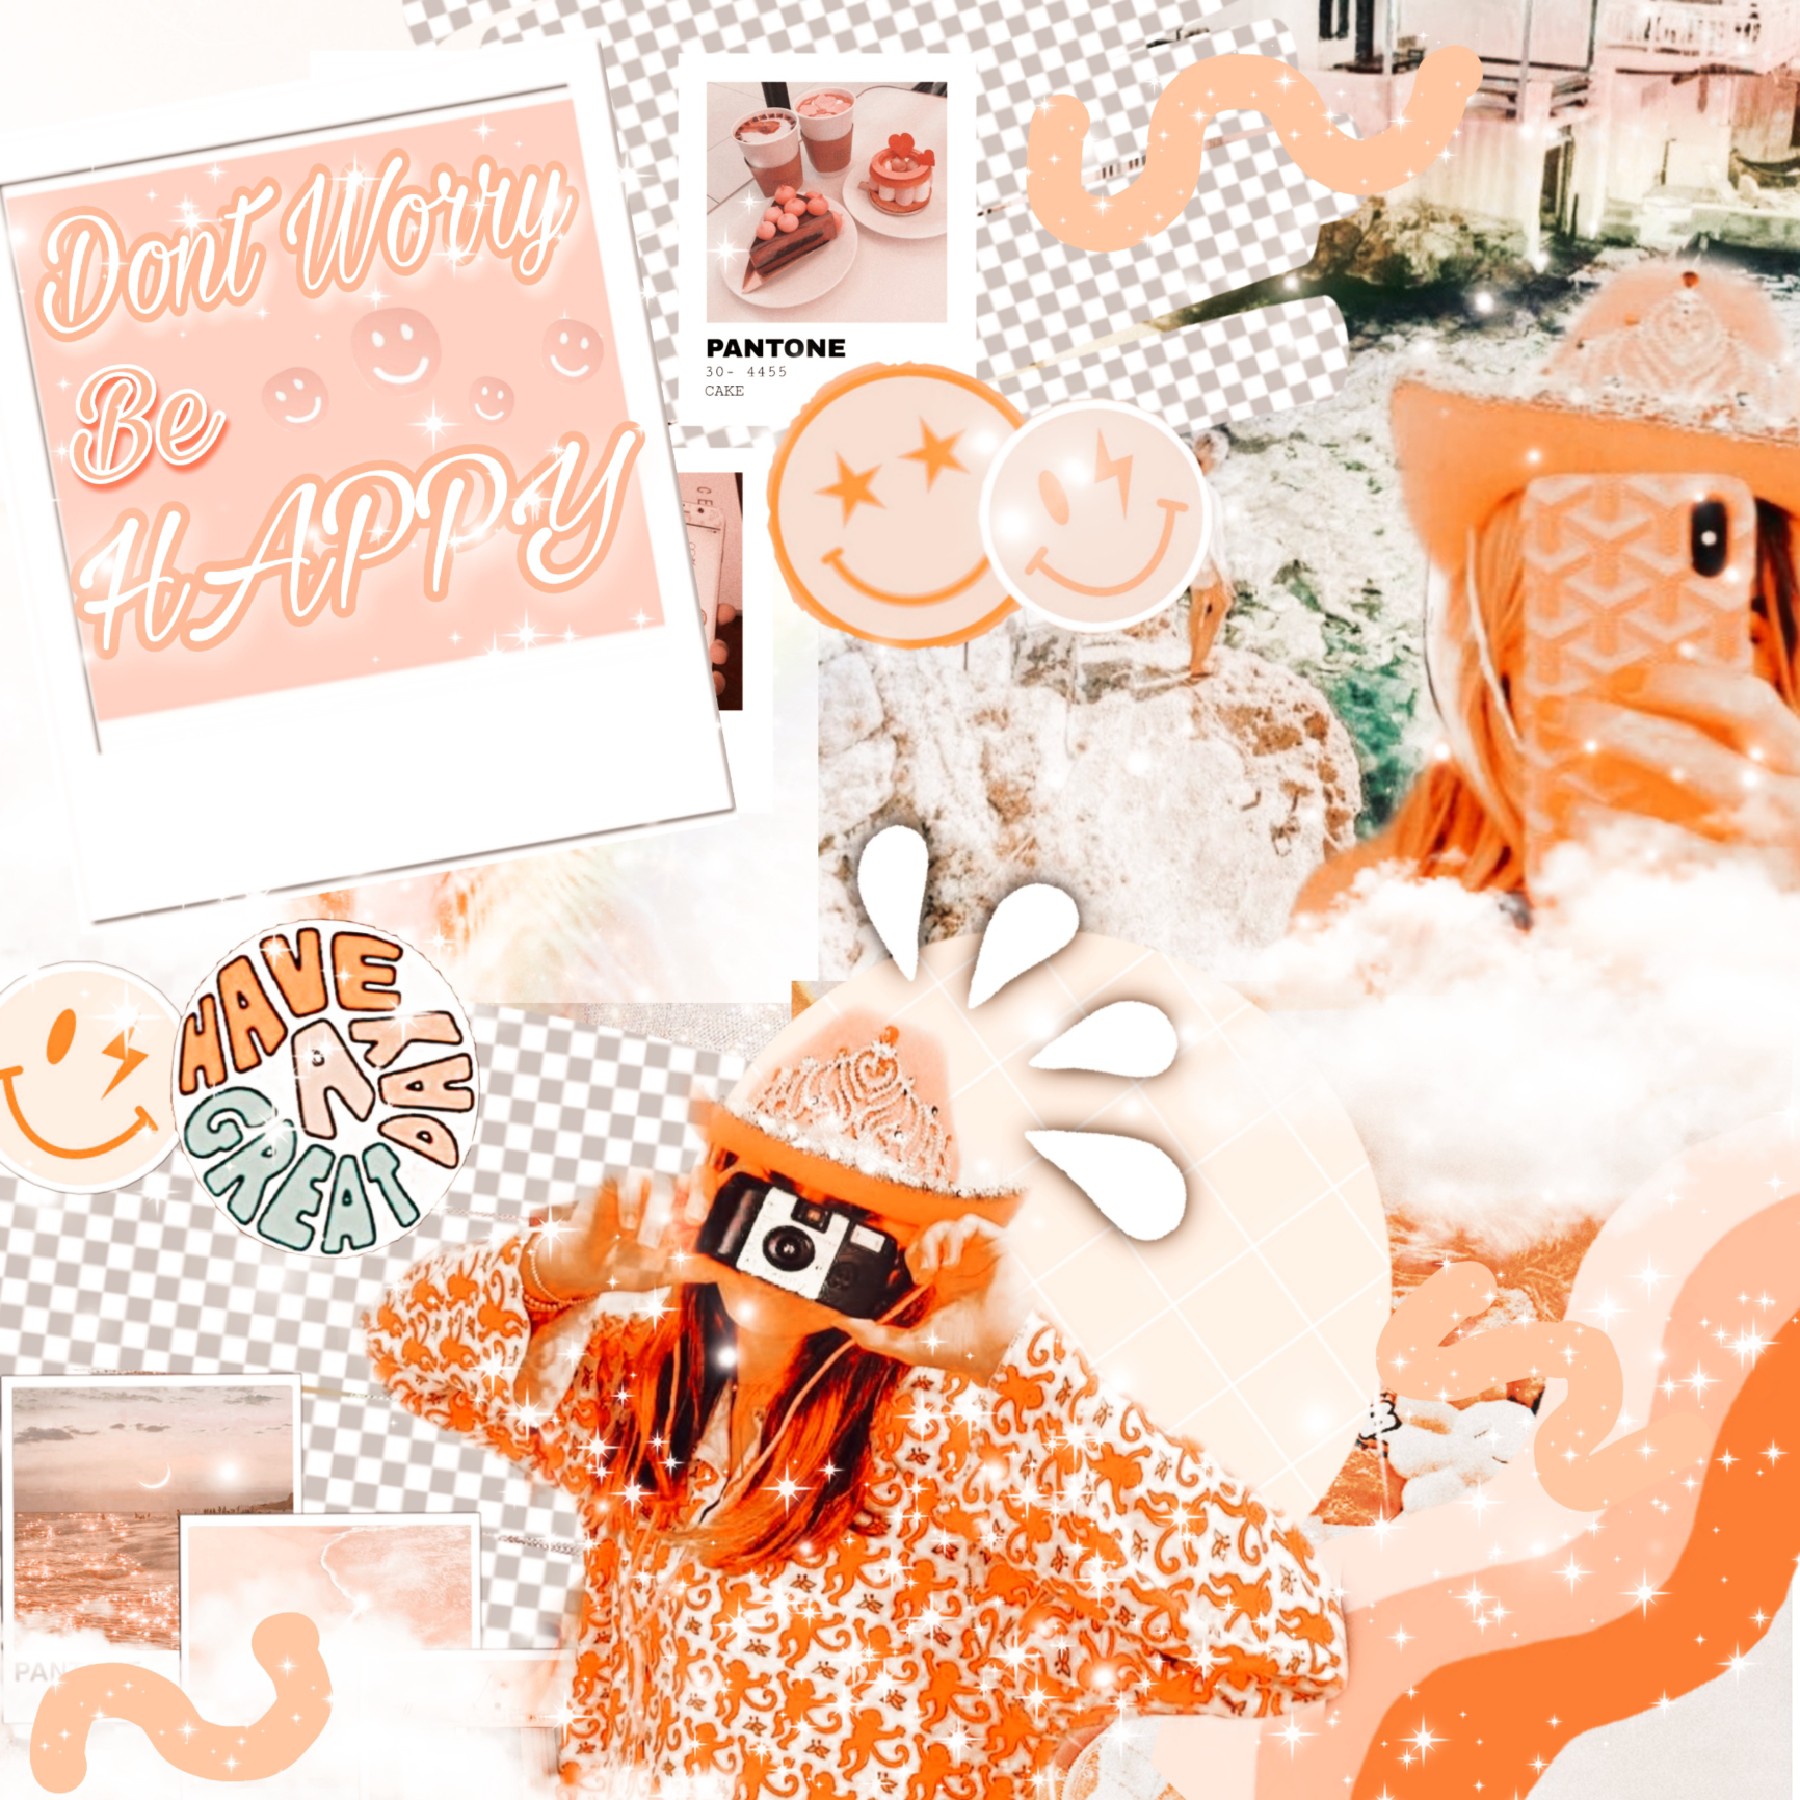 💕new post (tapppp) 💕
I have been on vacation for a week and am flying home today!! Collage tip: save the collage when it's done then add a filter to the whole thing to make it blend together!
qotd: When does school start for you?
aotd: August 30th 😭😭😭